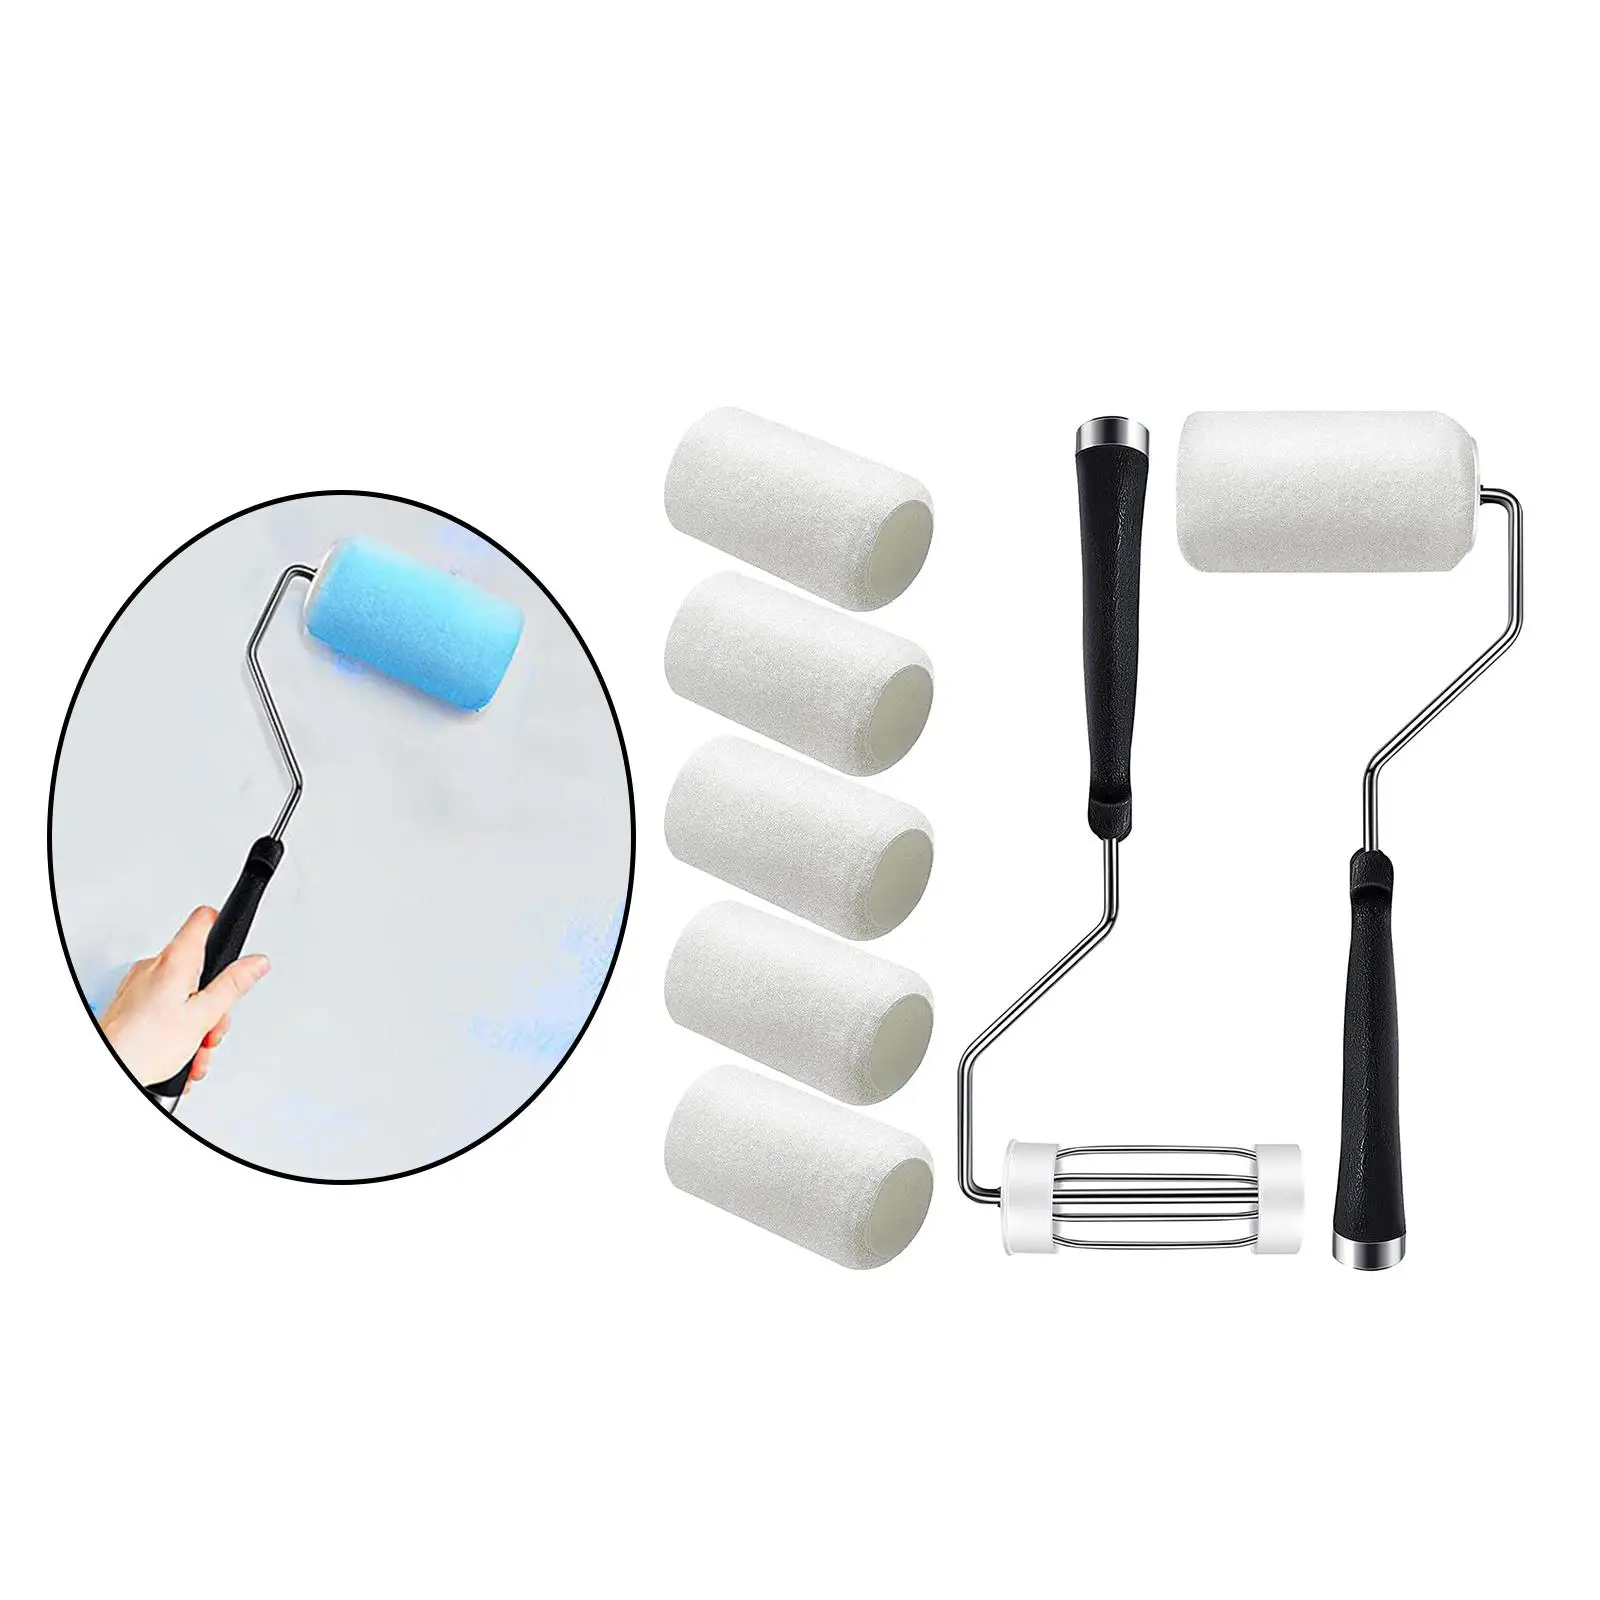 Handle Sponge Paint Roller of 8 Tool Painting Decorative DIY for Ceiling Wall Painting Interior